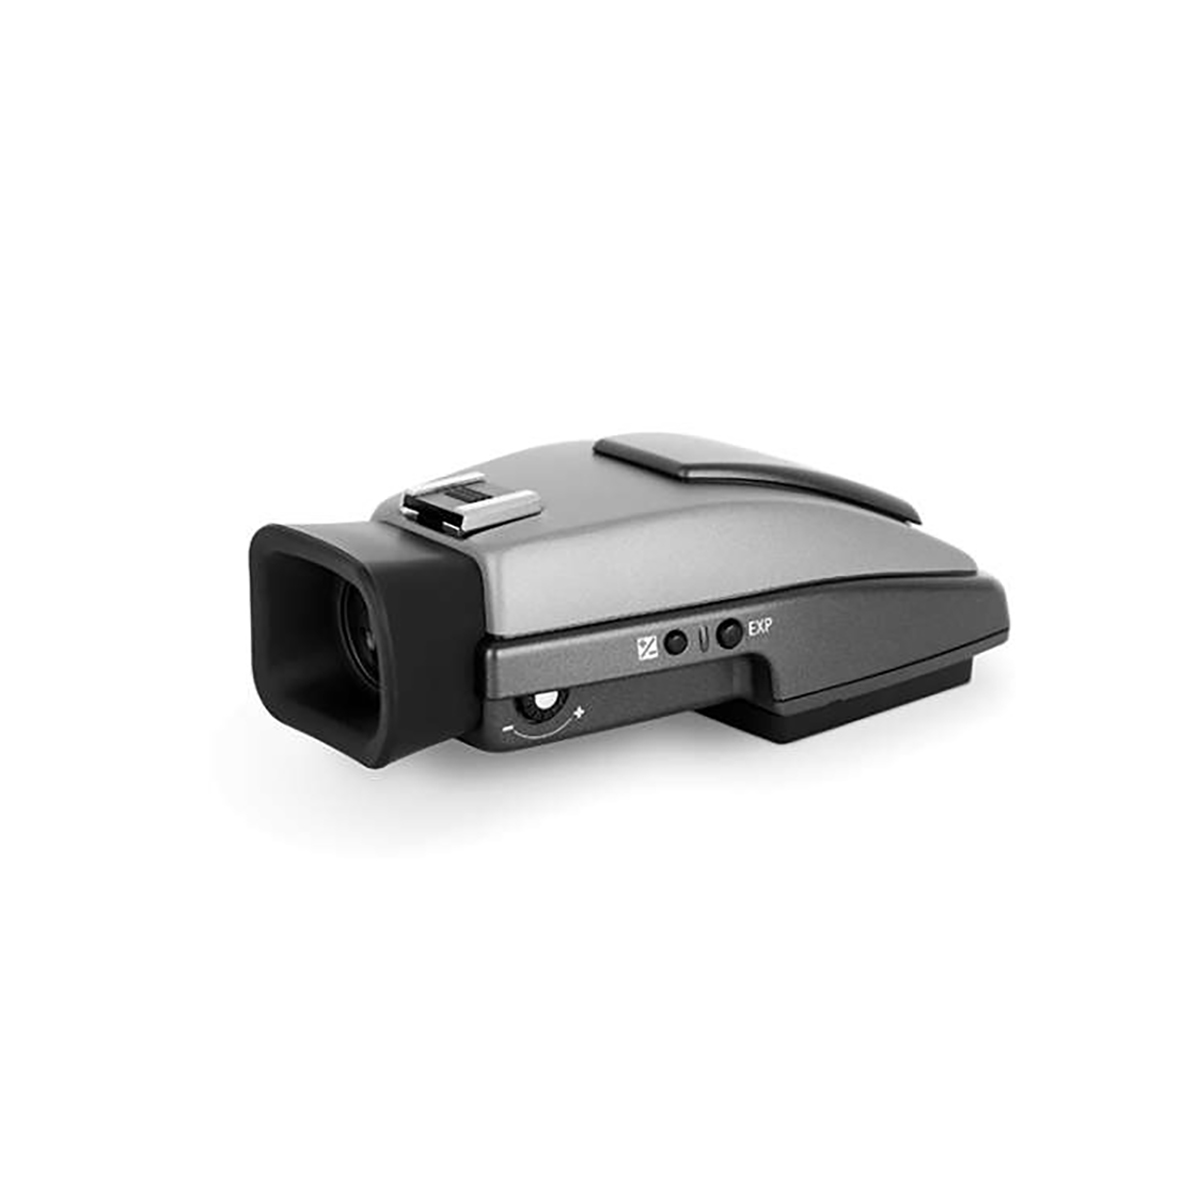 Hasselblad Viewfinder HVD 90x